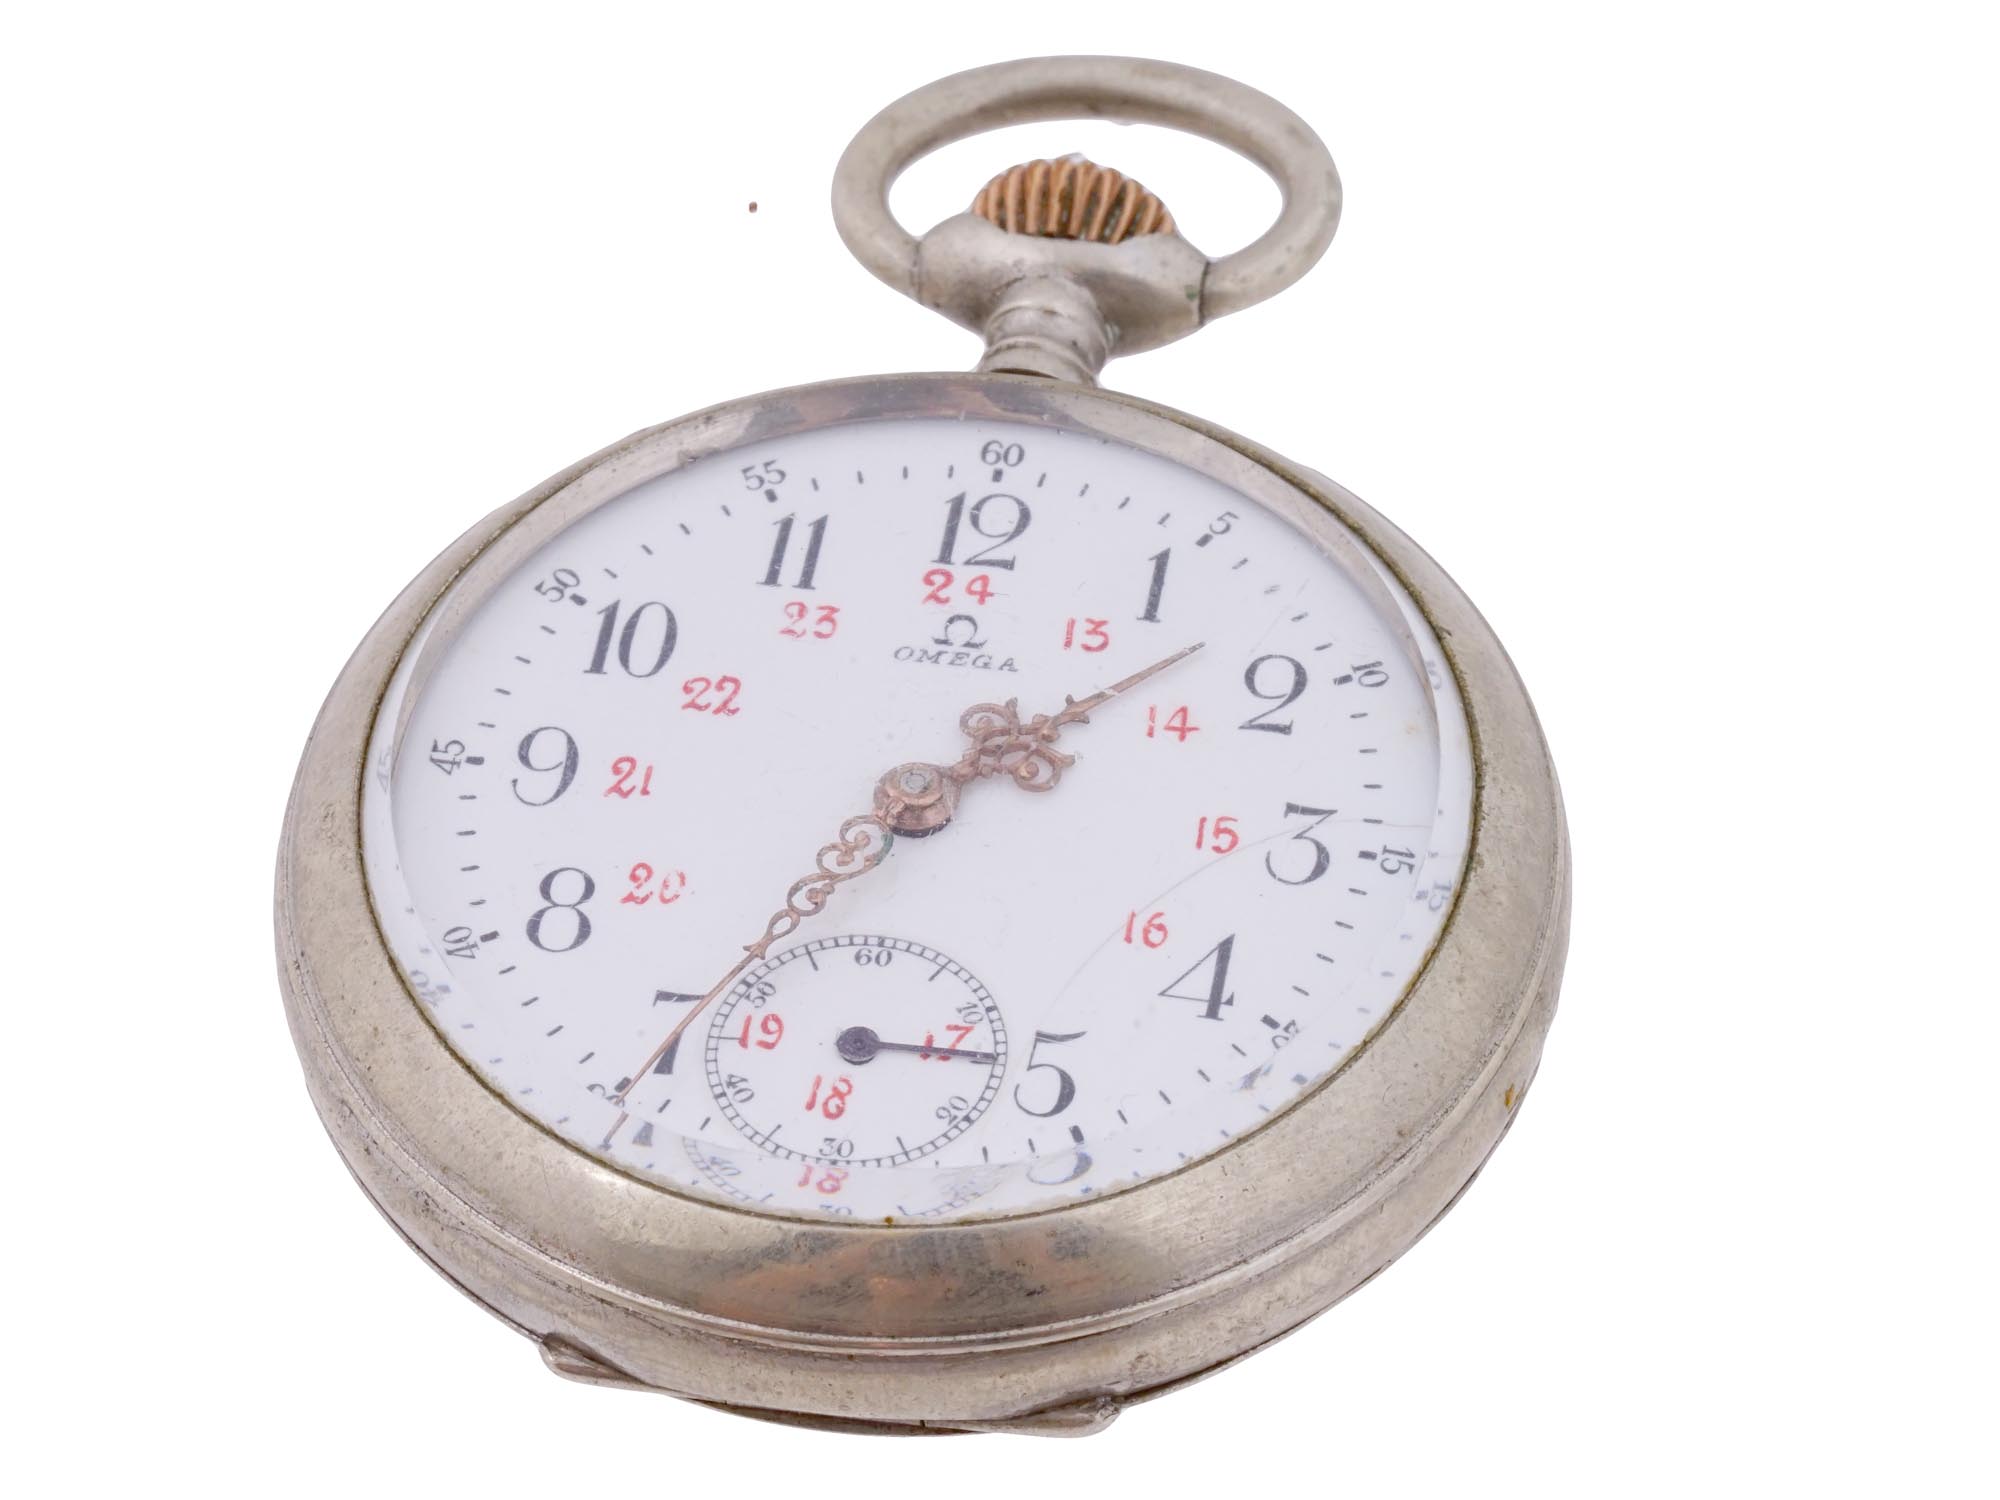 EARLY 20TH C SWISS OMEGA OPEN FACE POCKET WATCH PIC-1